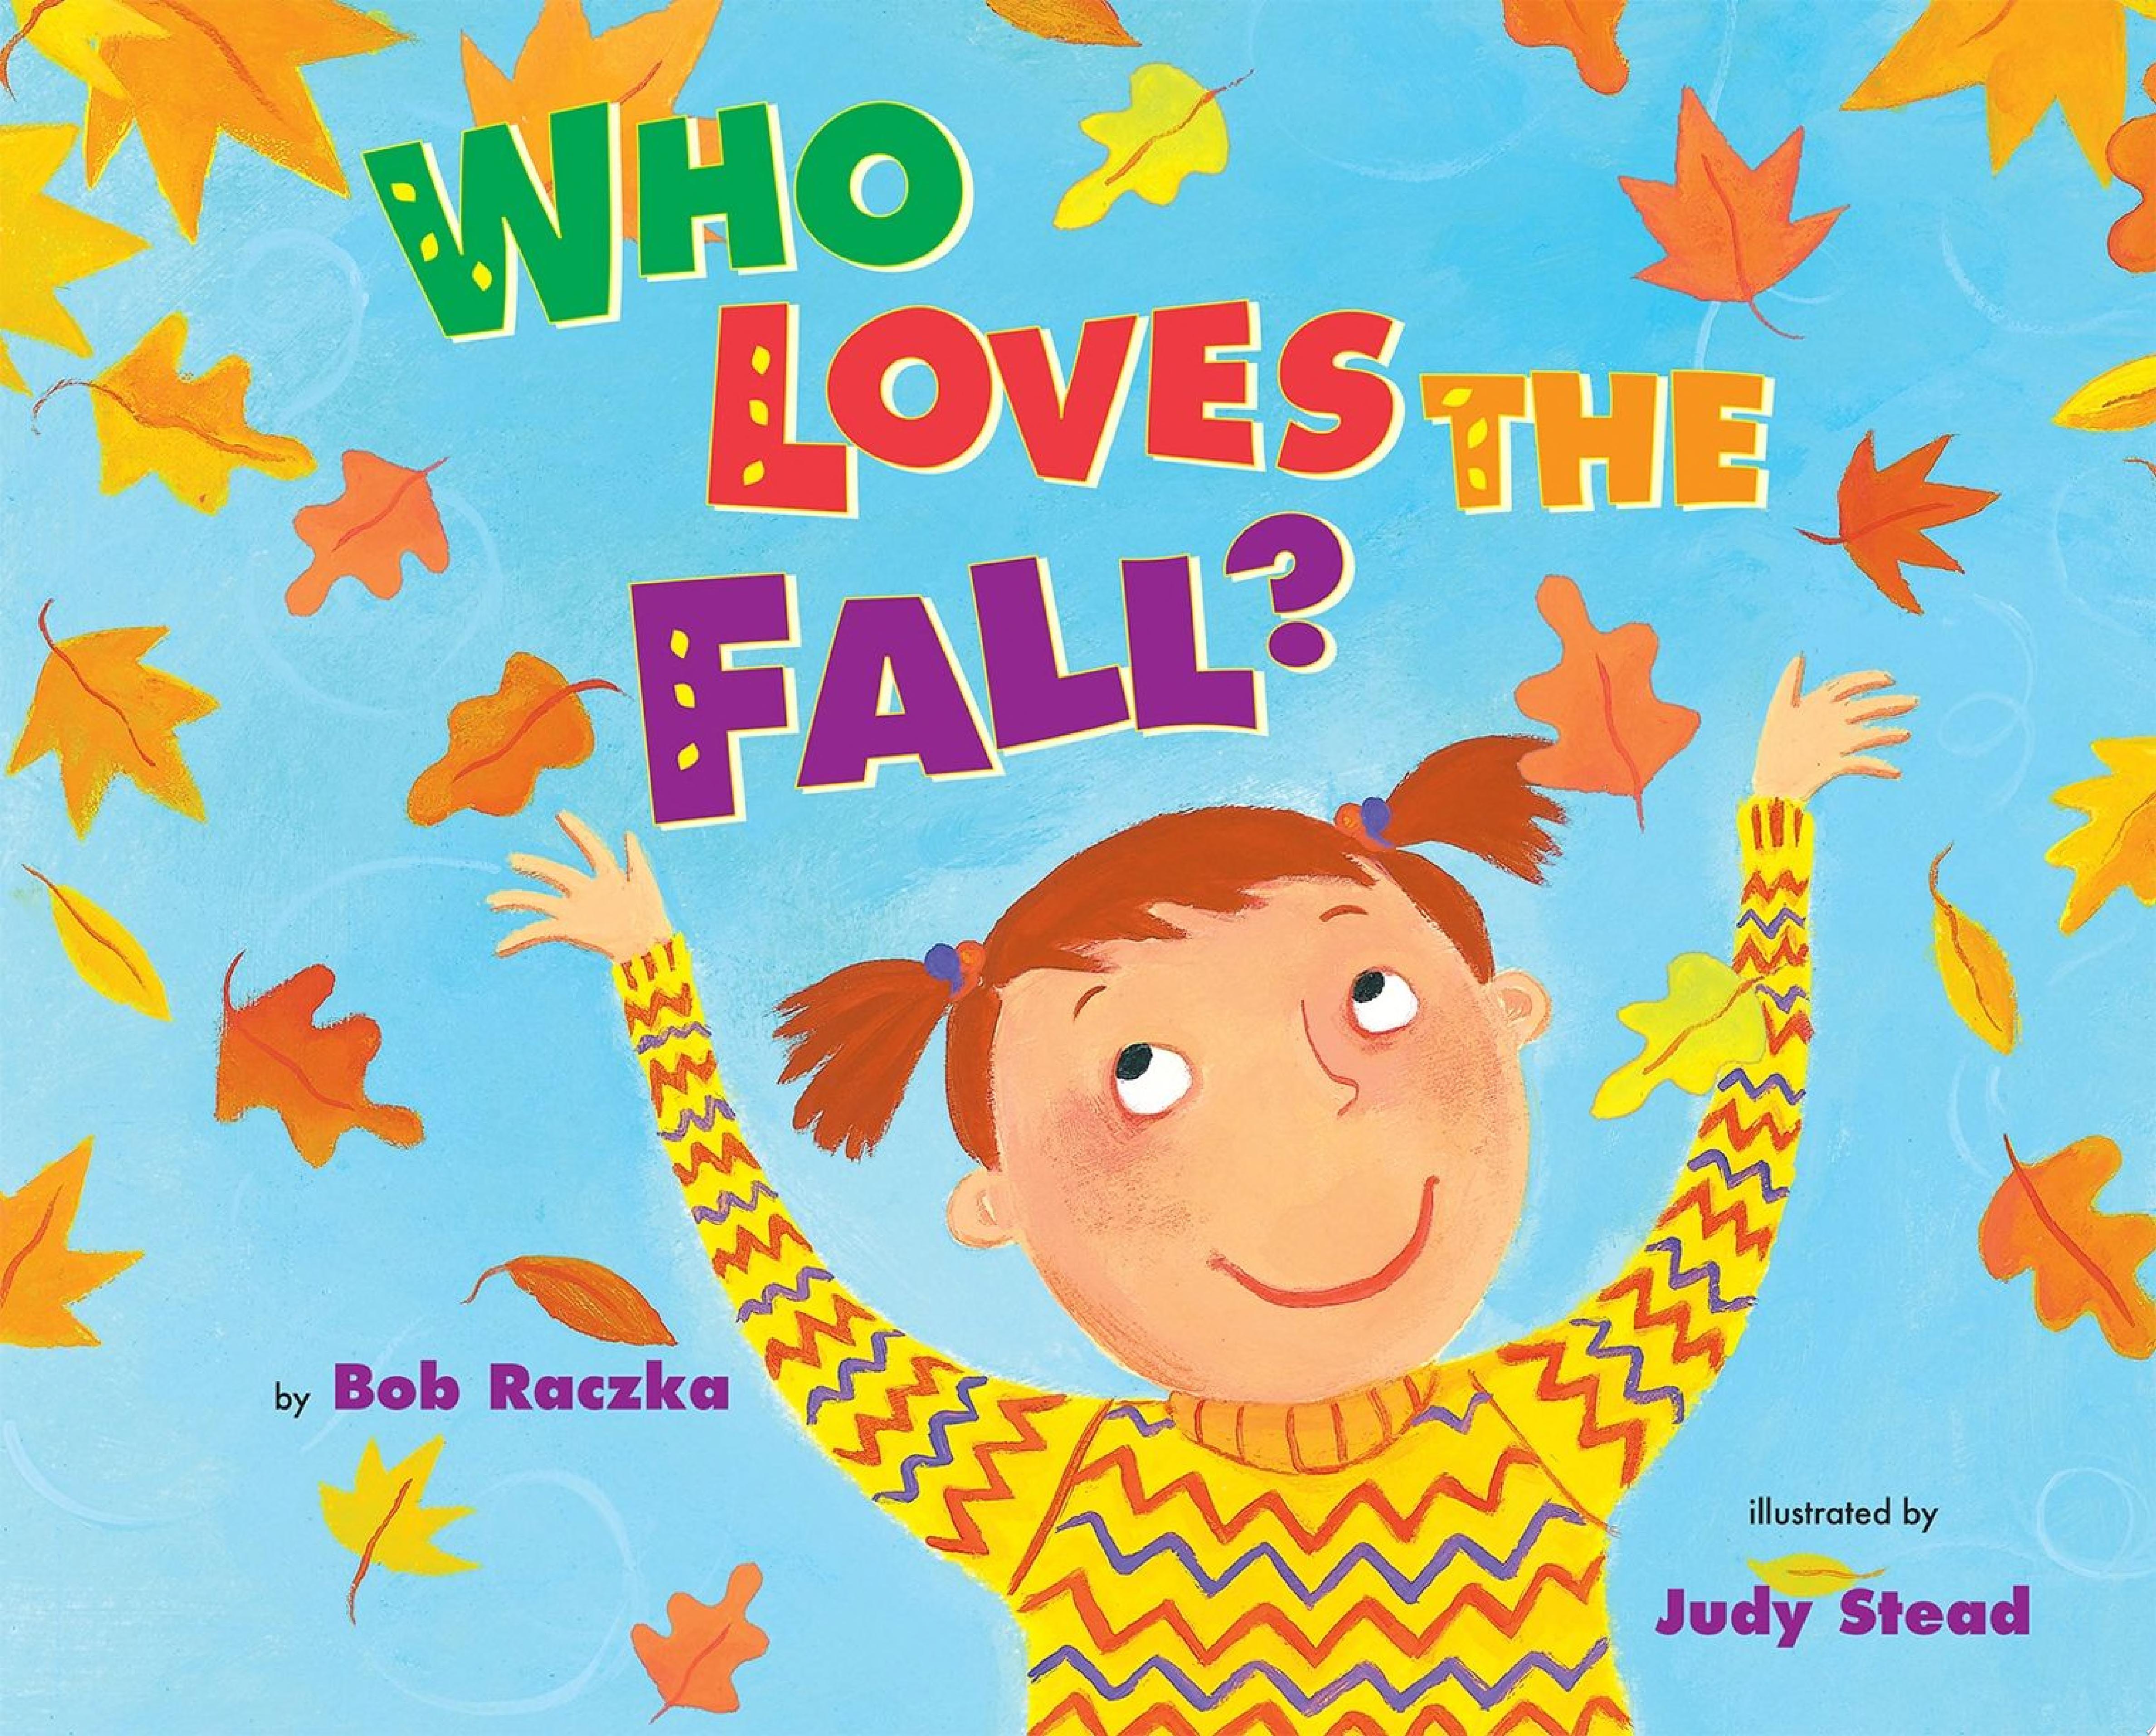 Image for "Who Loves the Fall?"